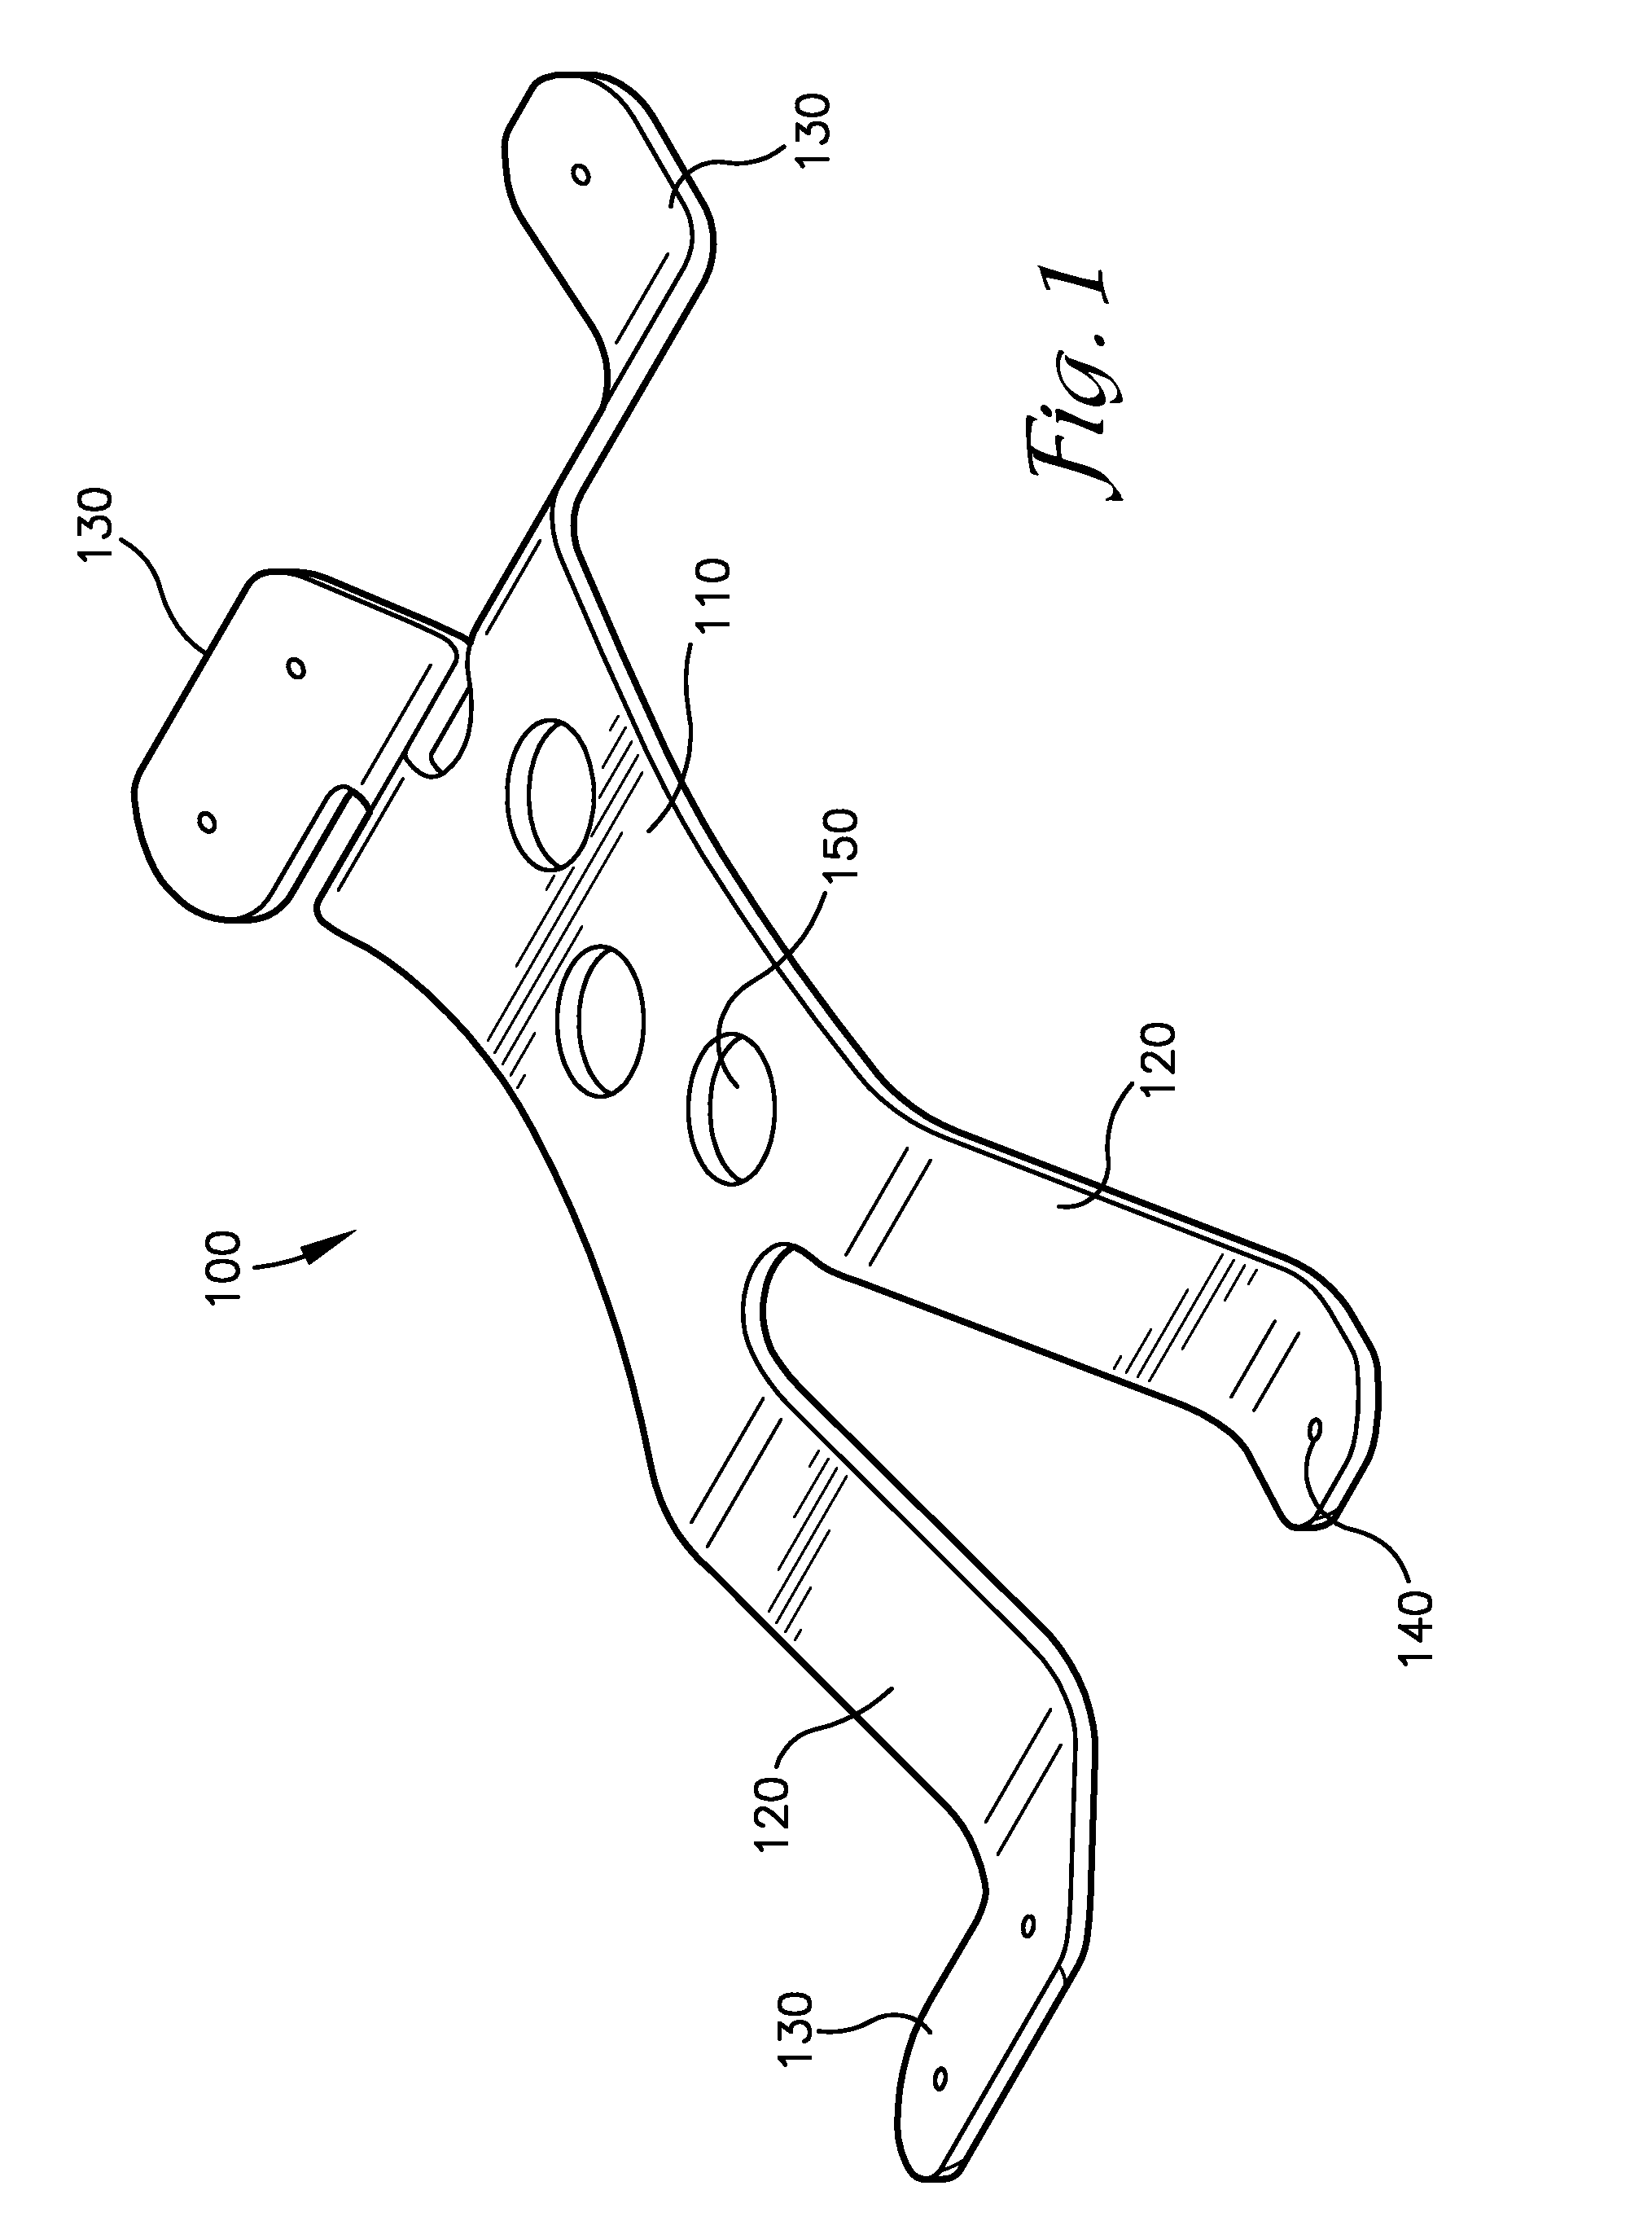 Cable mounting bracket apparatus and system